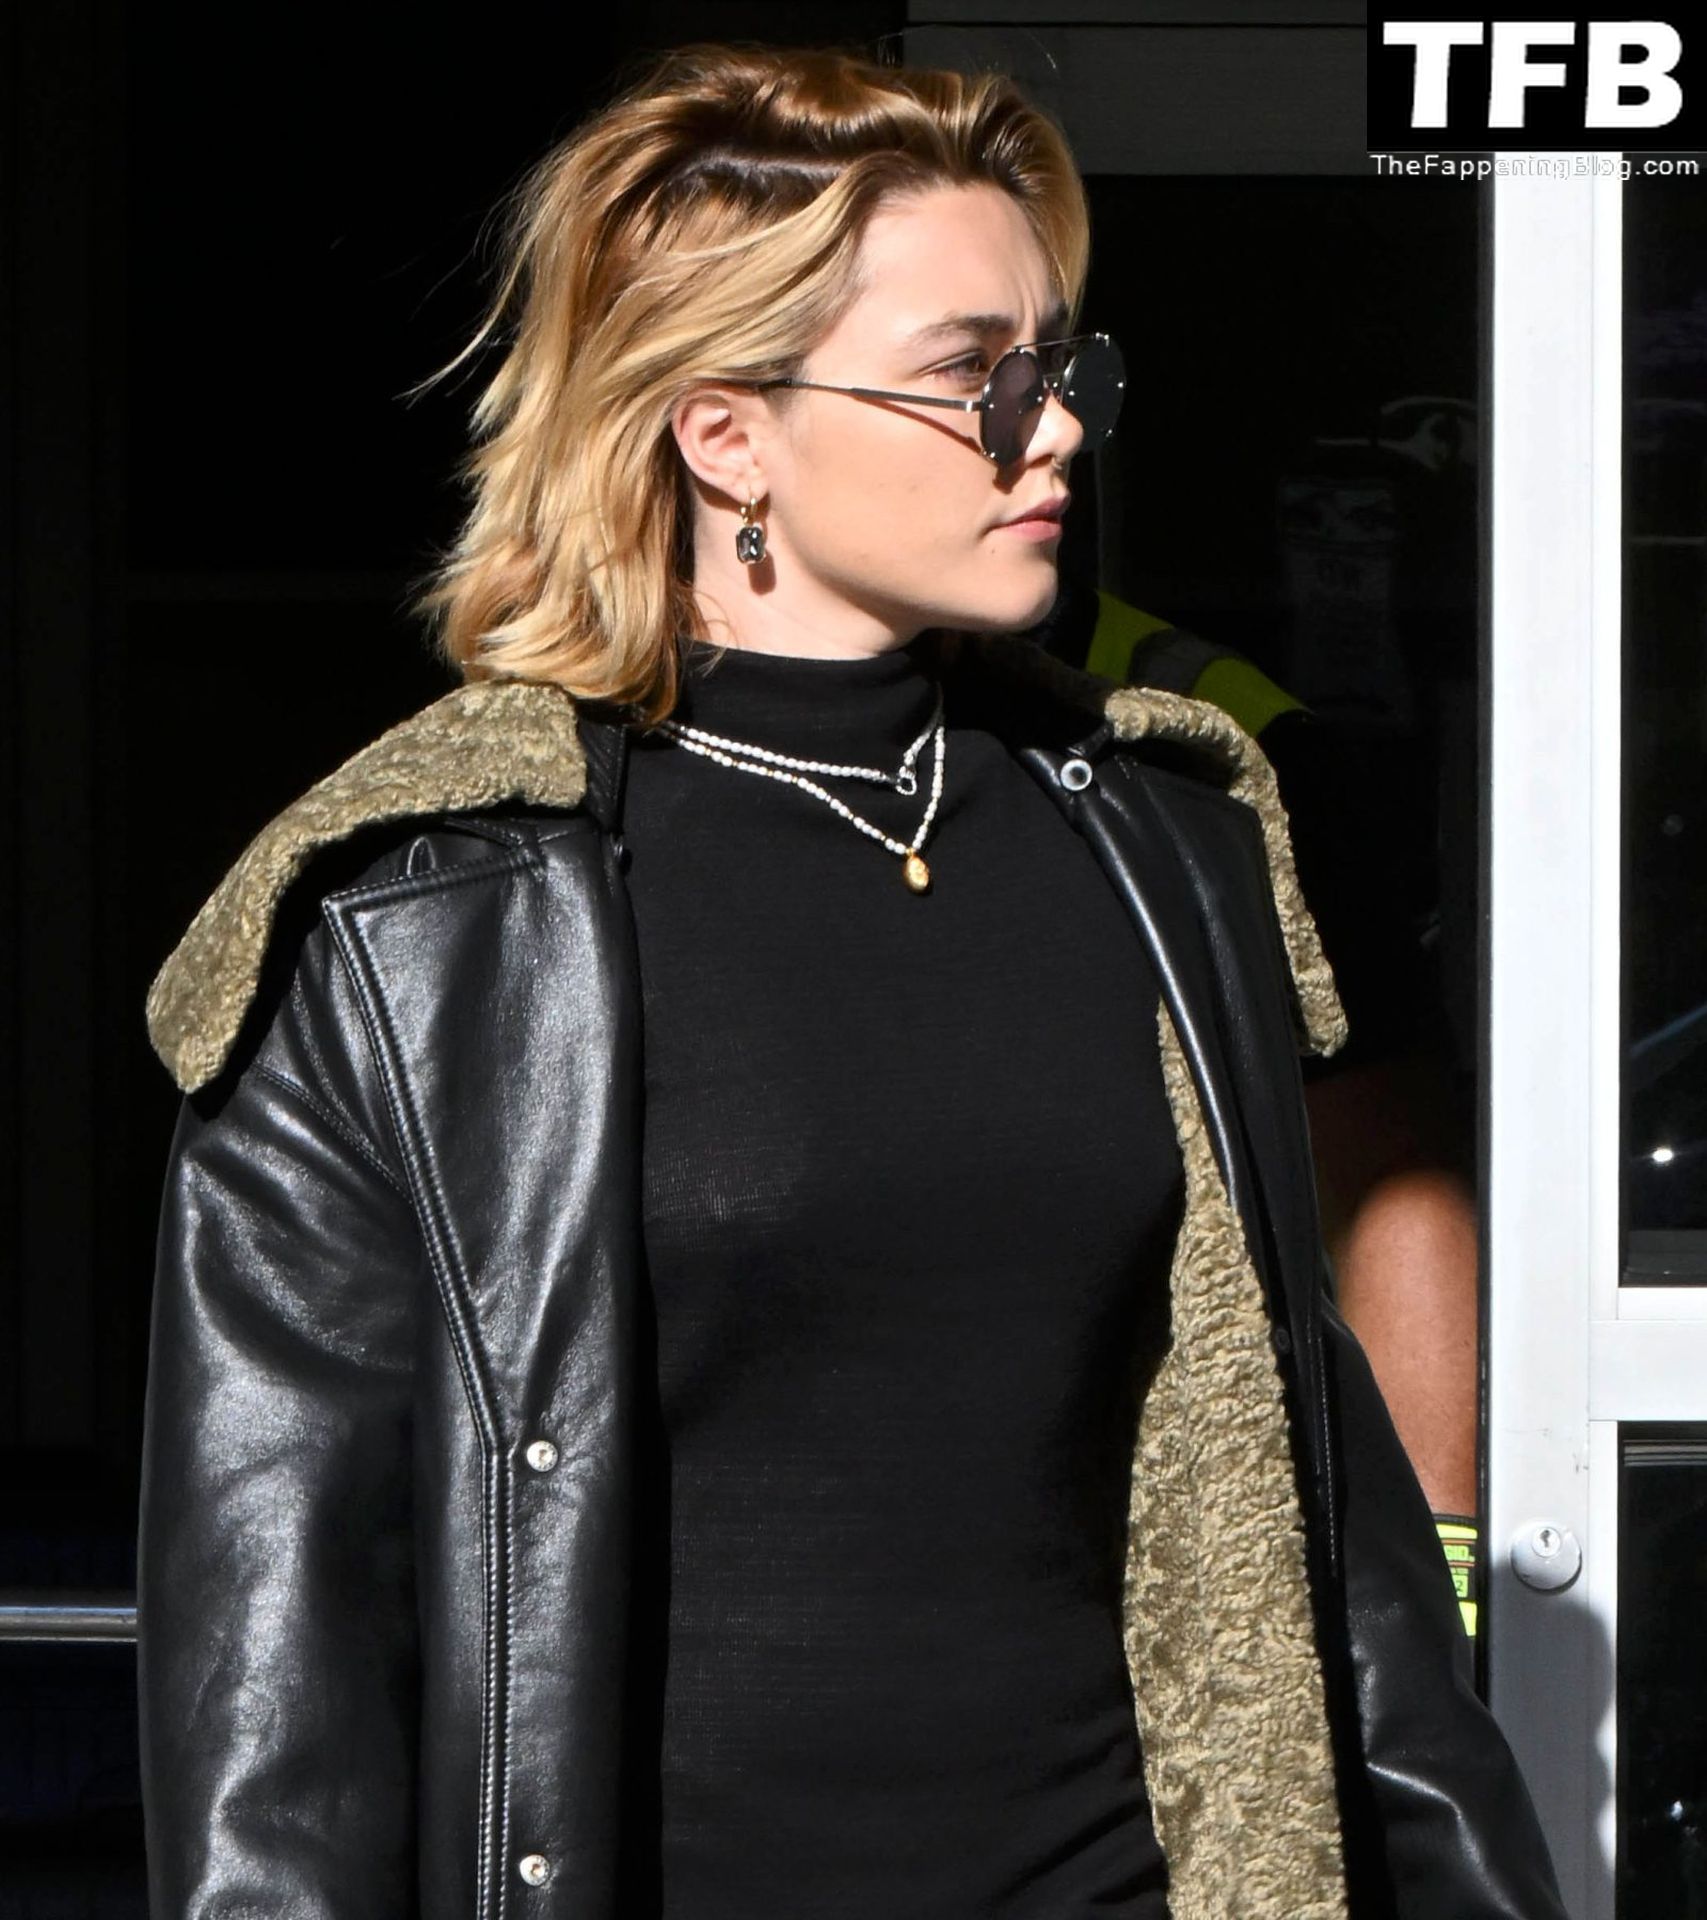 Florence Pugh Pokies The Fappening Blog 26 - Florence Pugh Shows Off Her Pokies at JFK airport in NYC (31 Photos)